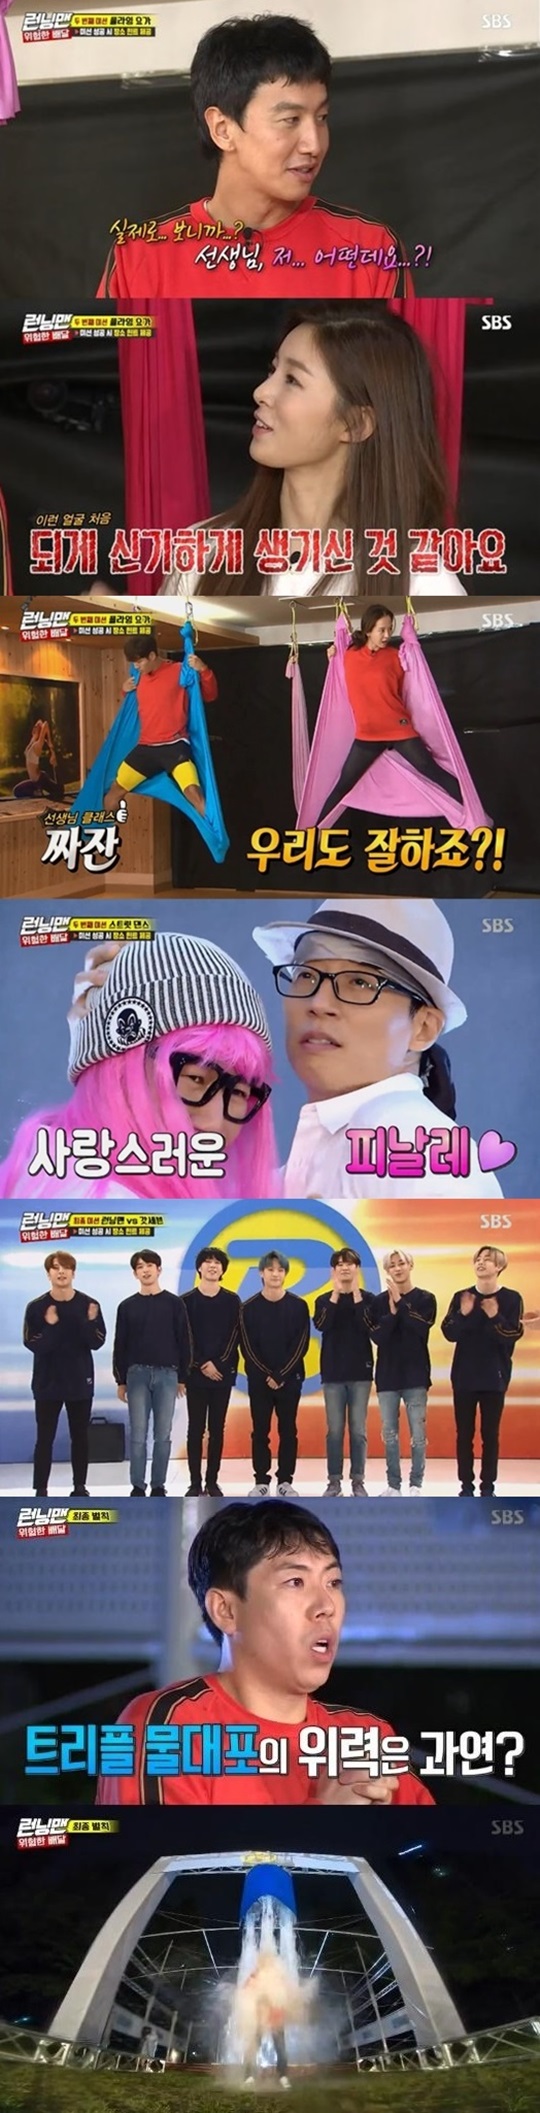 SBS Running Man caught both ratings and the topic.According to Nielsen Korea, a ratings agency, Running Man, which was broadcast on the 16th, recorded a target audience rating of 5.3% (based on households in the metropolitan area) between 20 and 49 years old (hereinafter referred to as 2049), which is considered an important indicator of major advertising officials.The highest audience rating per minute rose to 9.3%, which is close to 10%.On this day, Yoo Seung-ok, Jay Black & Marie, and God Se7en appeared as special guests as a special feature of Dangerous Delivery Race.The Running Man members were divided into a street dance team and a flying yoga team to challenge the mission.Jay Black & Marie passed on the fantastic dance skills to Yoo Jae-seok, Jeon So-min, and Haha, and did not spare the encouragement that he was doing well. Eventually, he completed the dance mission of the street dance team including Horse Ji Seok-jin.The yoga team was bright with Yoo Seung-ok and Lee Kwang-soos success as Yoga teachers. Yoo Seung-ok told Lee Kwang-soo, It looks amazing.I think it resembles a horse. Lee Kwang-soo showed off his tit-for-tat chemistry by doubting Yoo Seung-oks yoga skills.Yoo Seung-ok declared that he could not with Lee Kwang-soo, but Kim Jong-guk forced Lee Kwang-soo to stretch the mission.The best one minute of the broadcast was a confrontation between God Se7en, who appeared in surprise with the members of Running Man.GOT7 won the first showdown Long Jump with Jacksons performance, but lost the second and third games, and the Running Man members took the victory.This scene recorded the highest audience rating of 9.3% at the moment, and after the broadcast, Yoo Seung-ok, Jay Black & Marie, and God Seven came up and down the real-time search query and received the attention of viewers.On the other hand, the final penalty was confirmed as Yang Chan, and the finale was decorated with a stronger water cannon than usual.